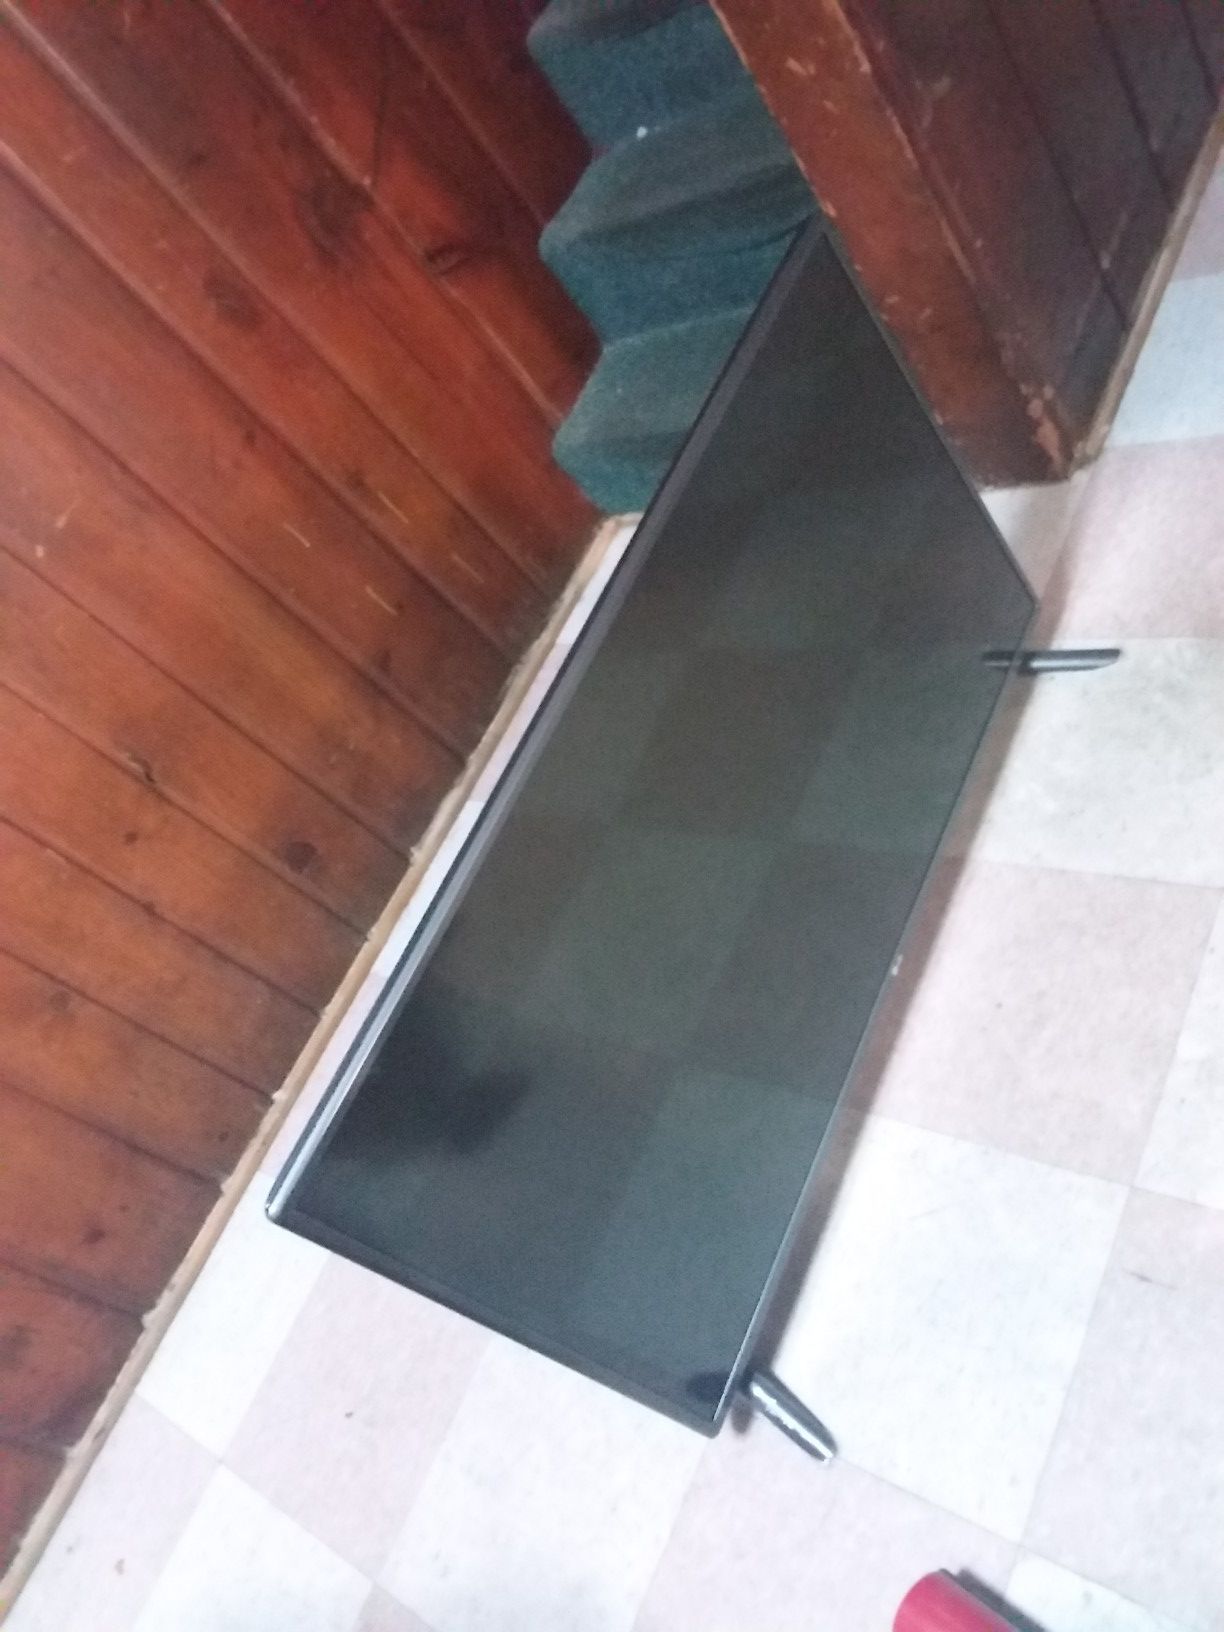 Lg smart tv for sale 42 inch